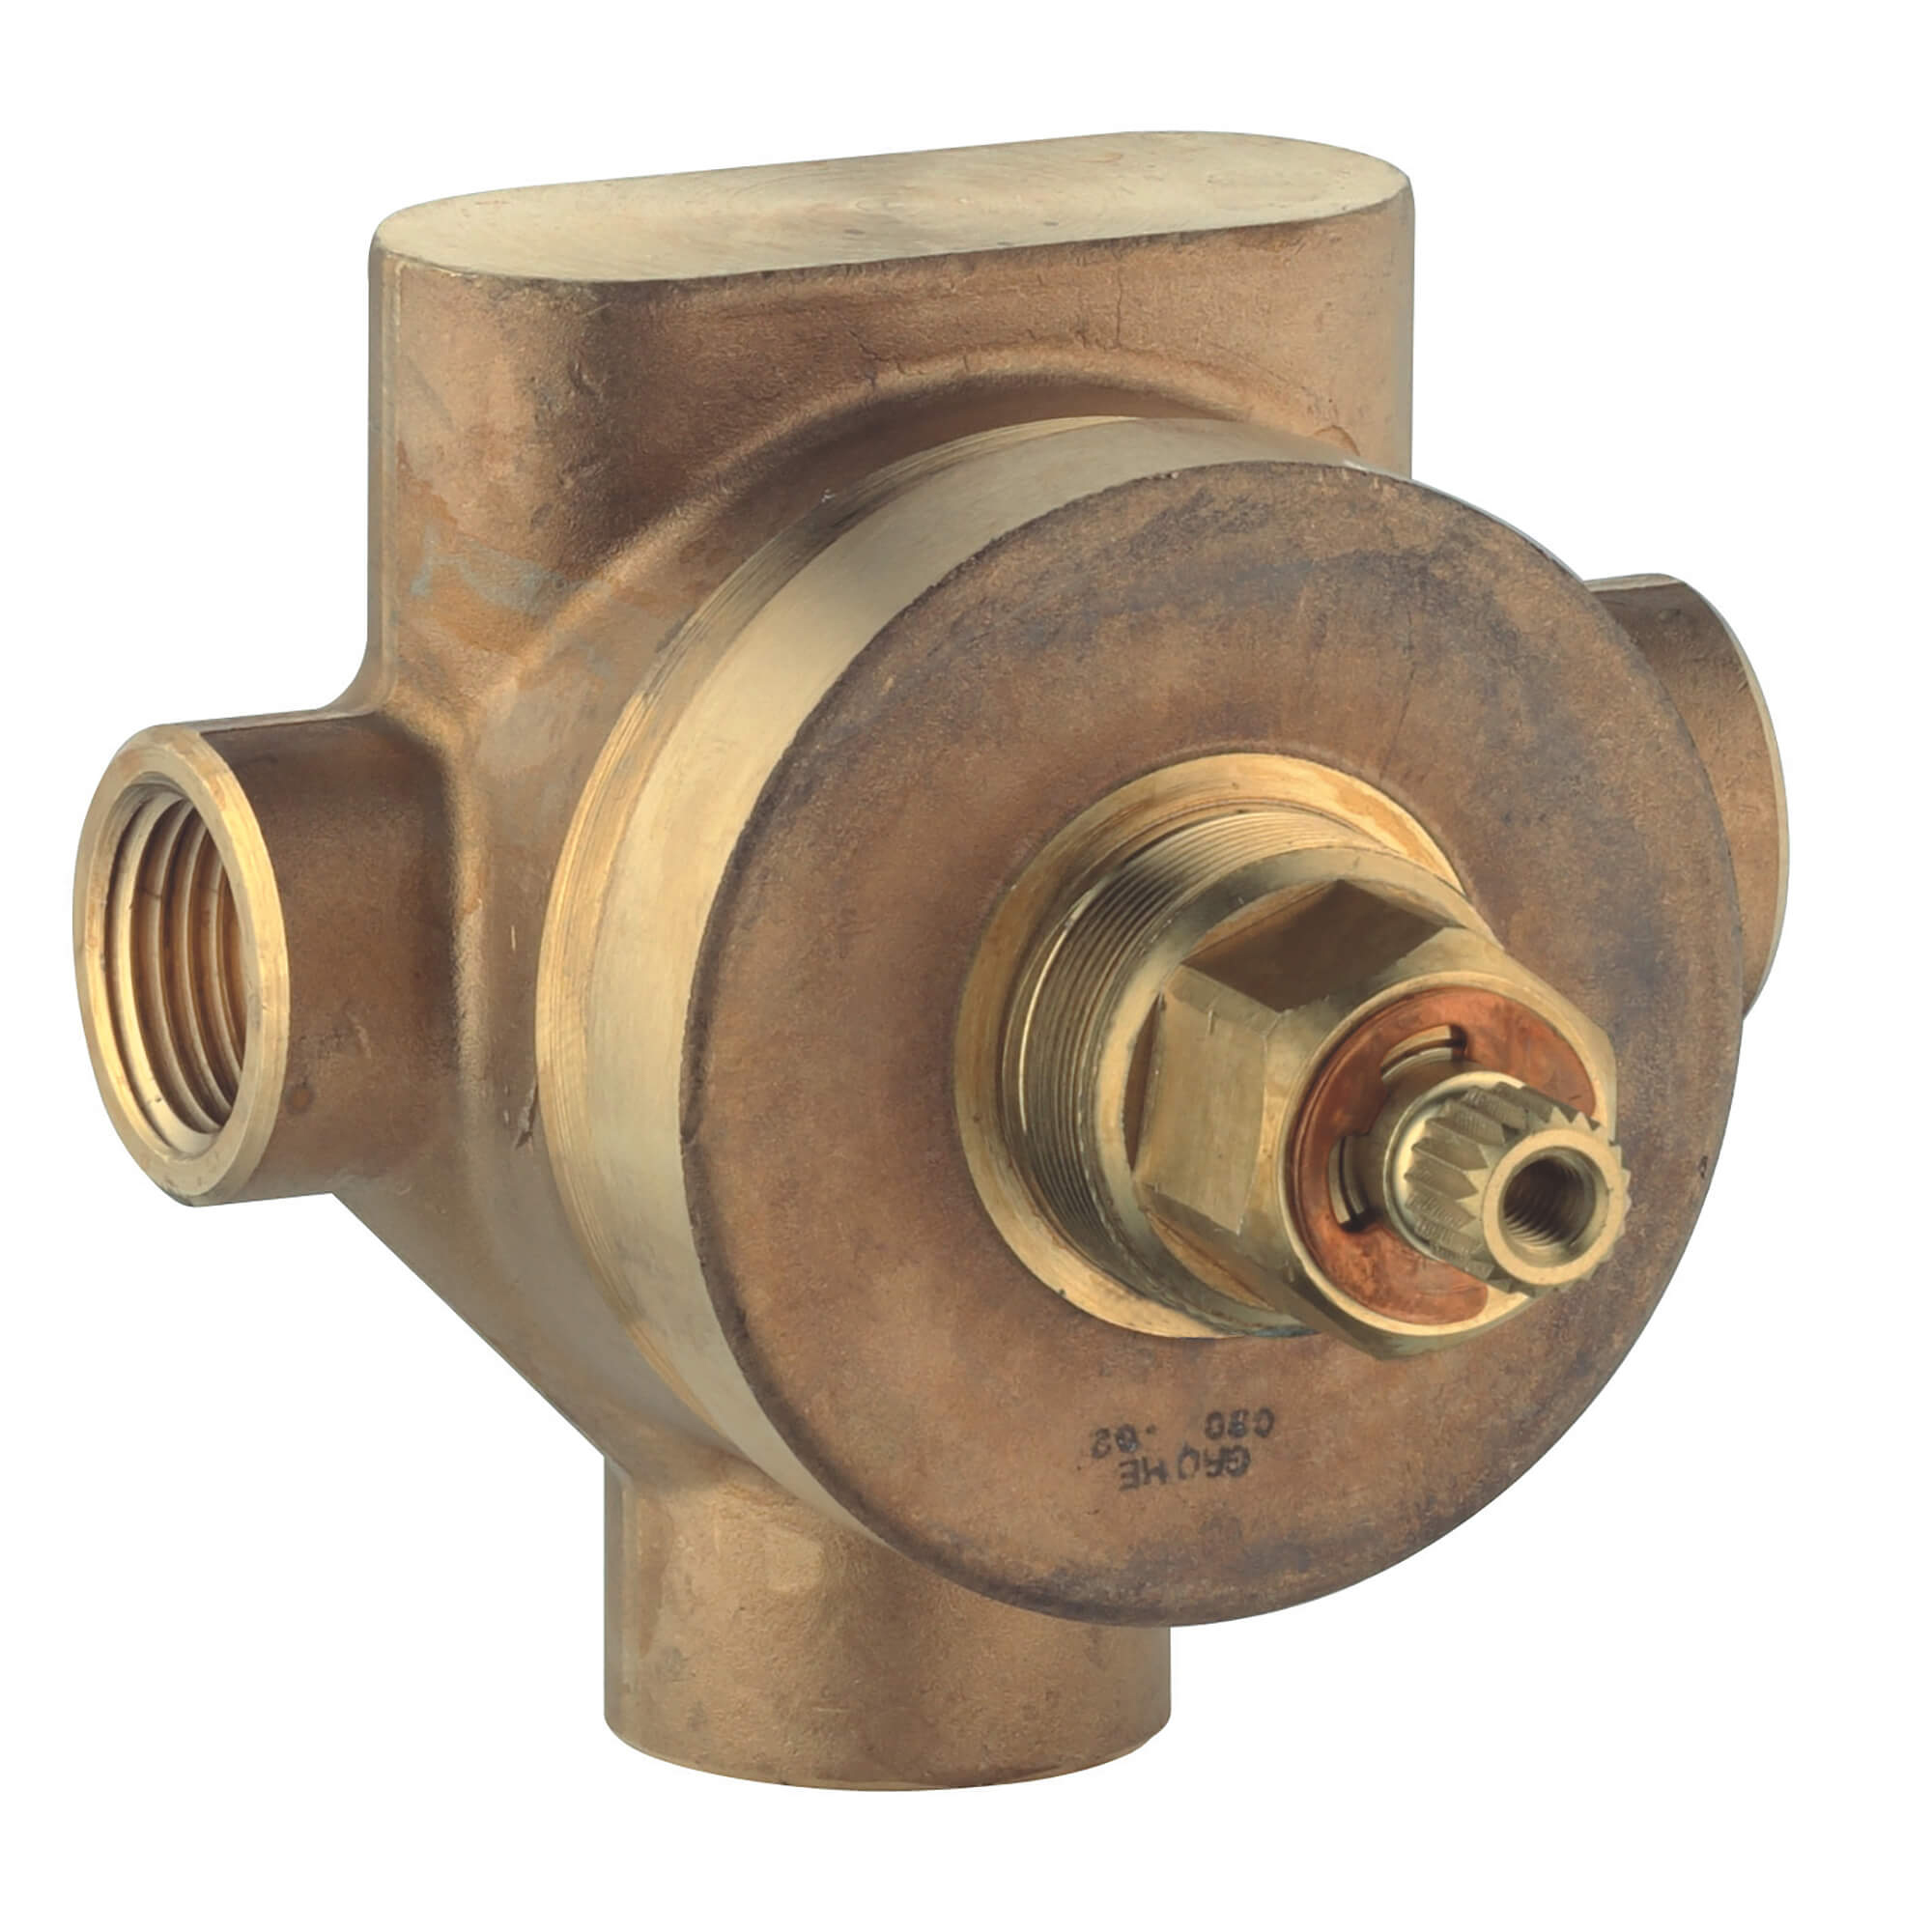 2-Way Diverter Rough-In Valve Shared Functions 1/2" NPT 2 Outlets